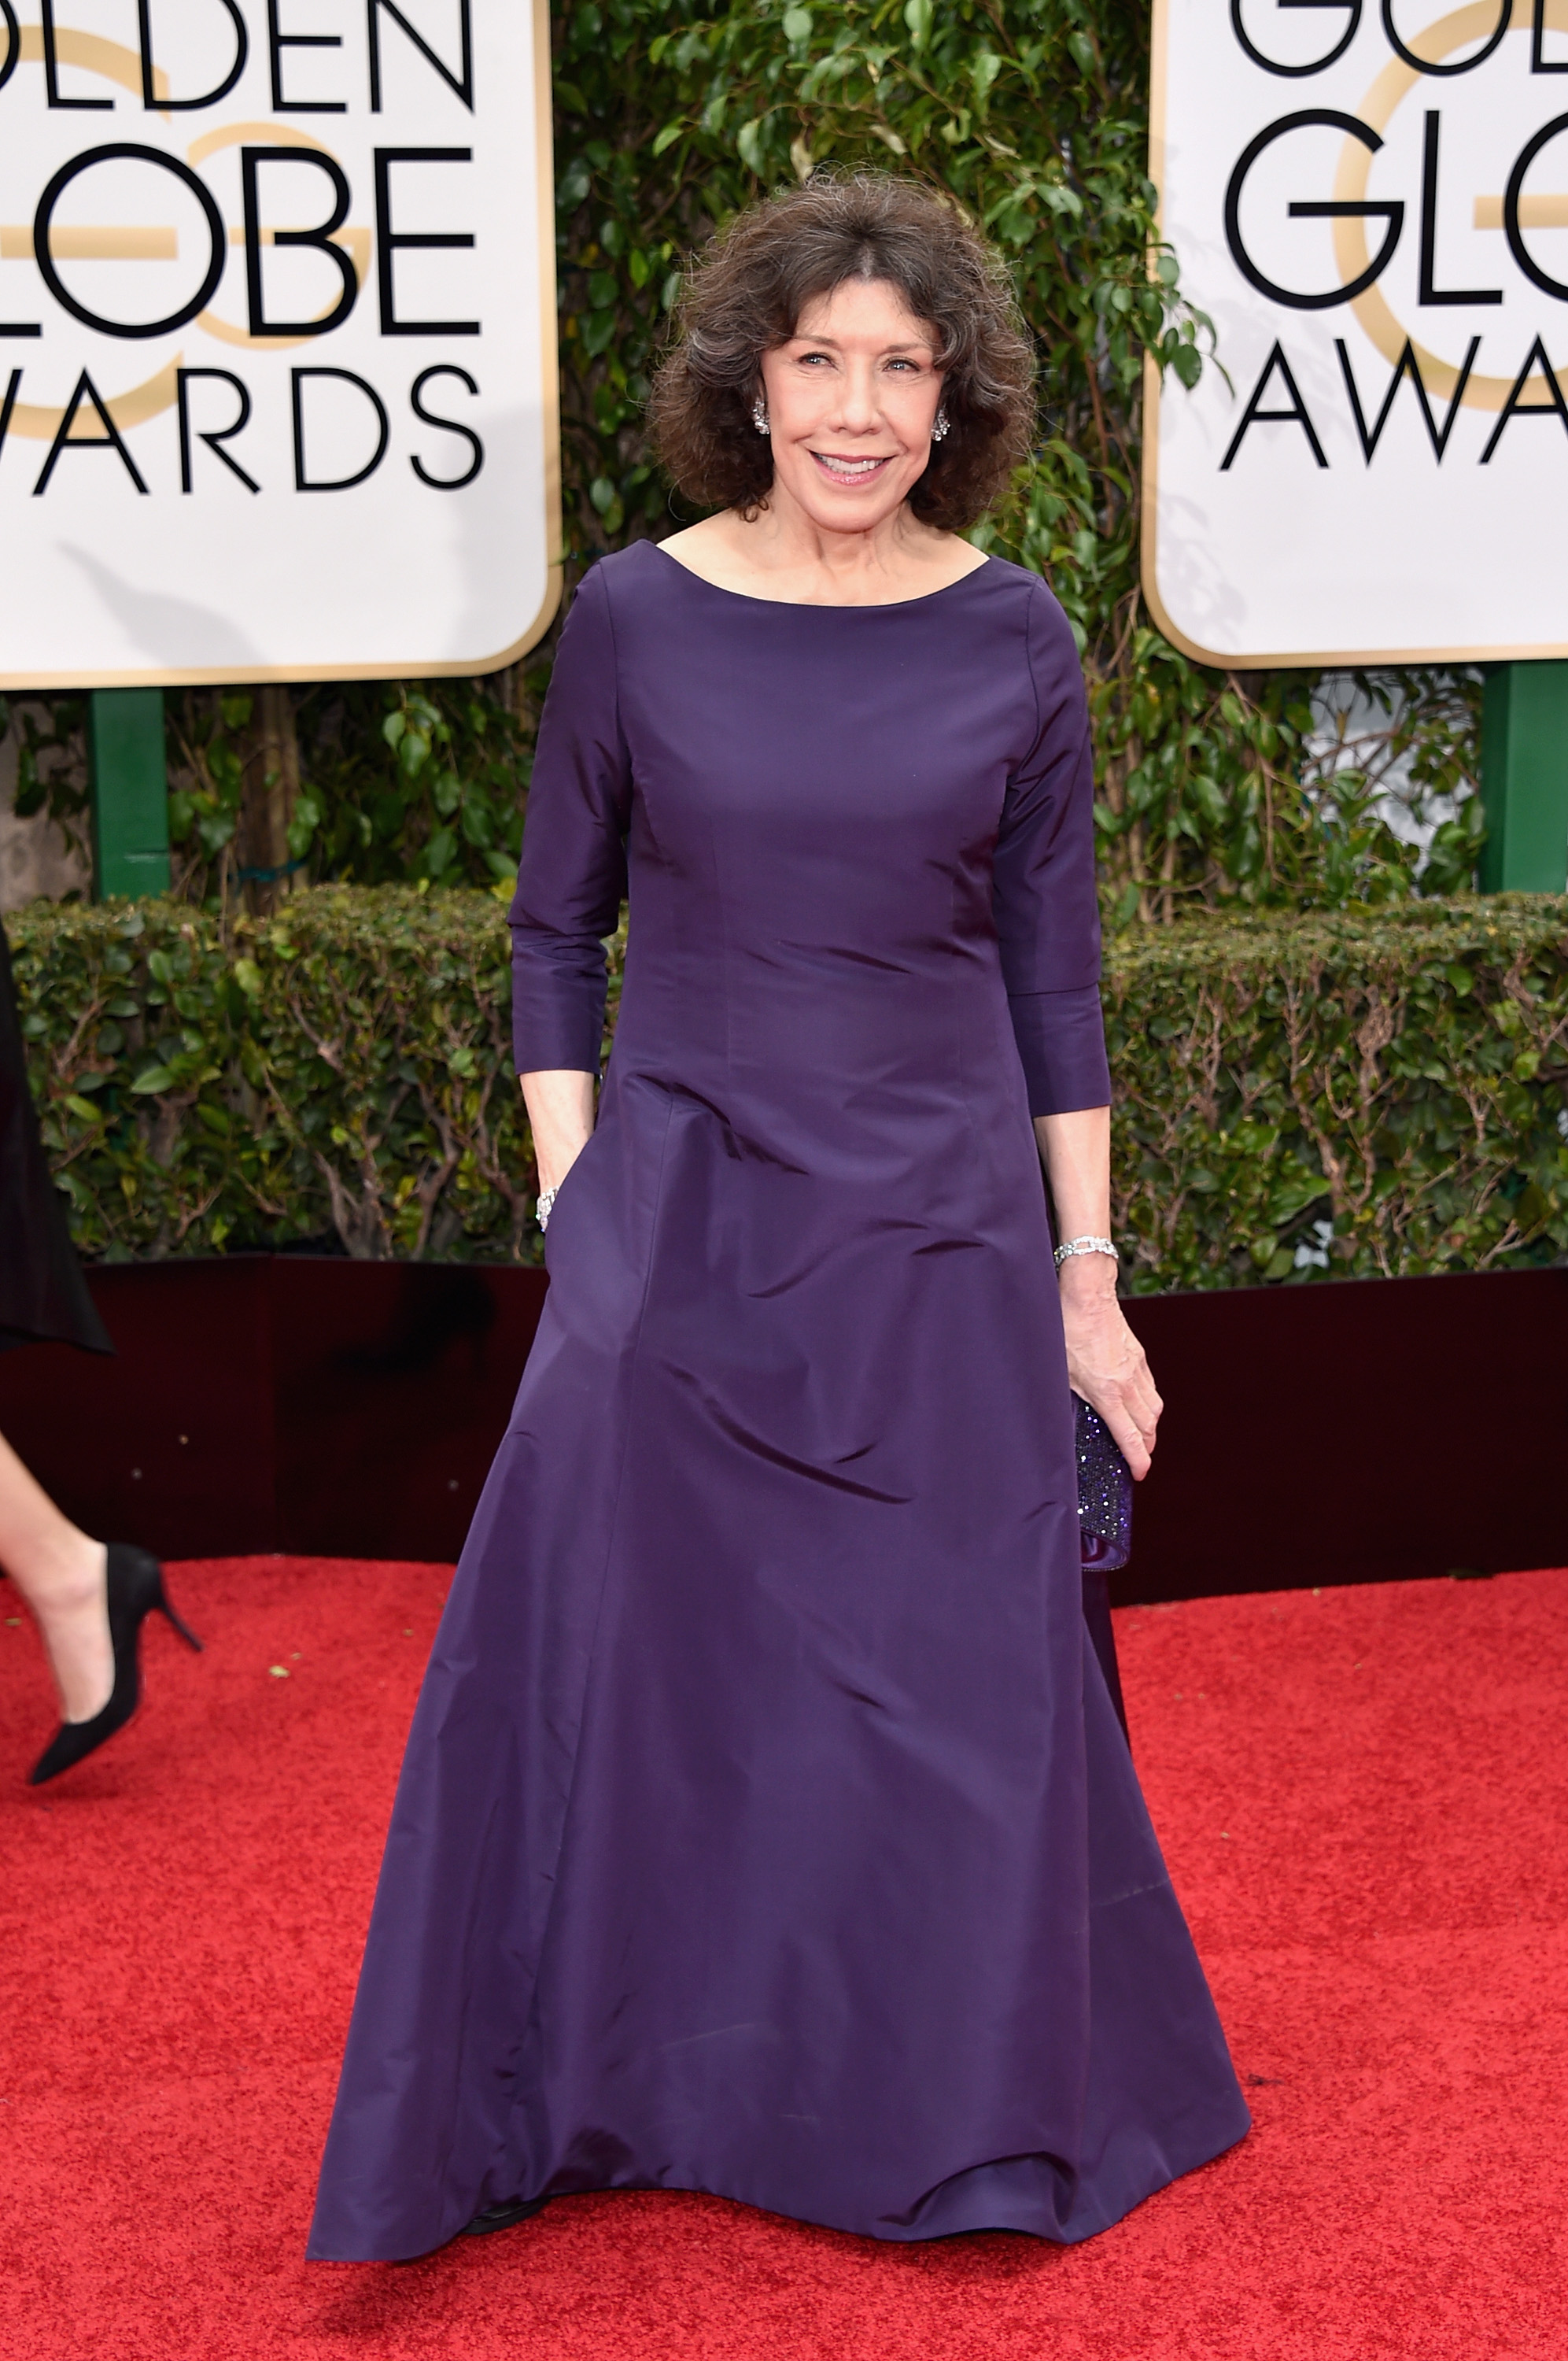 Lily Tomlin arrives to the 73rd Annual Golden Globe Awards on Jan. 10, 2016 in Beverly Hills.